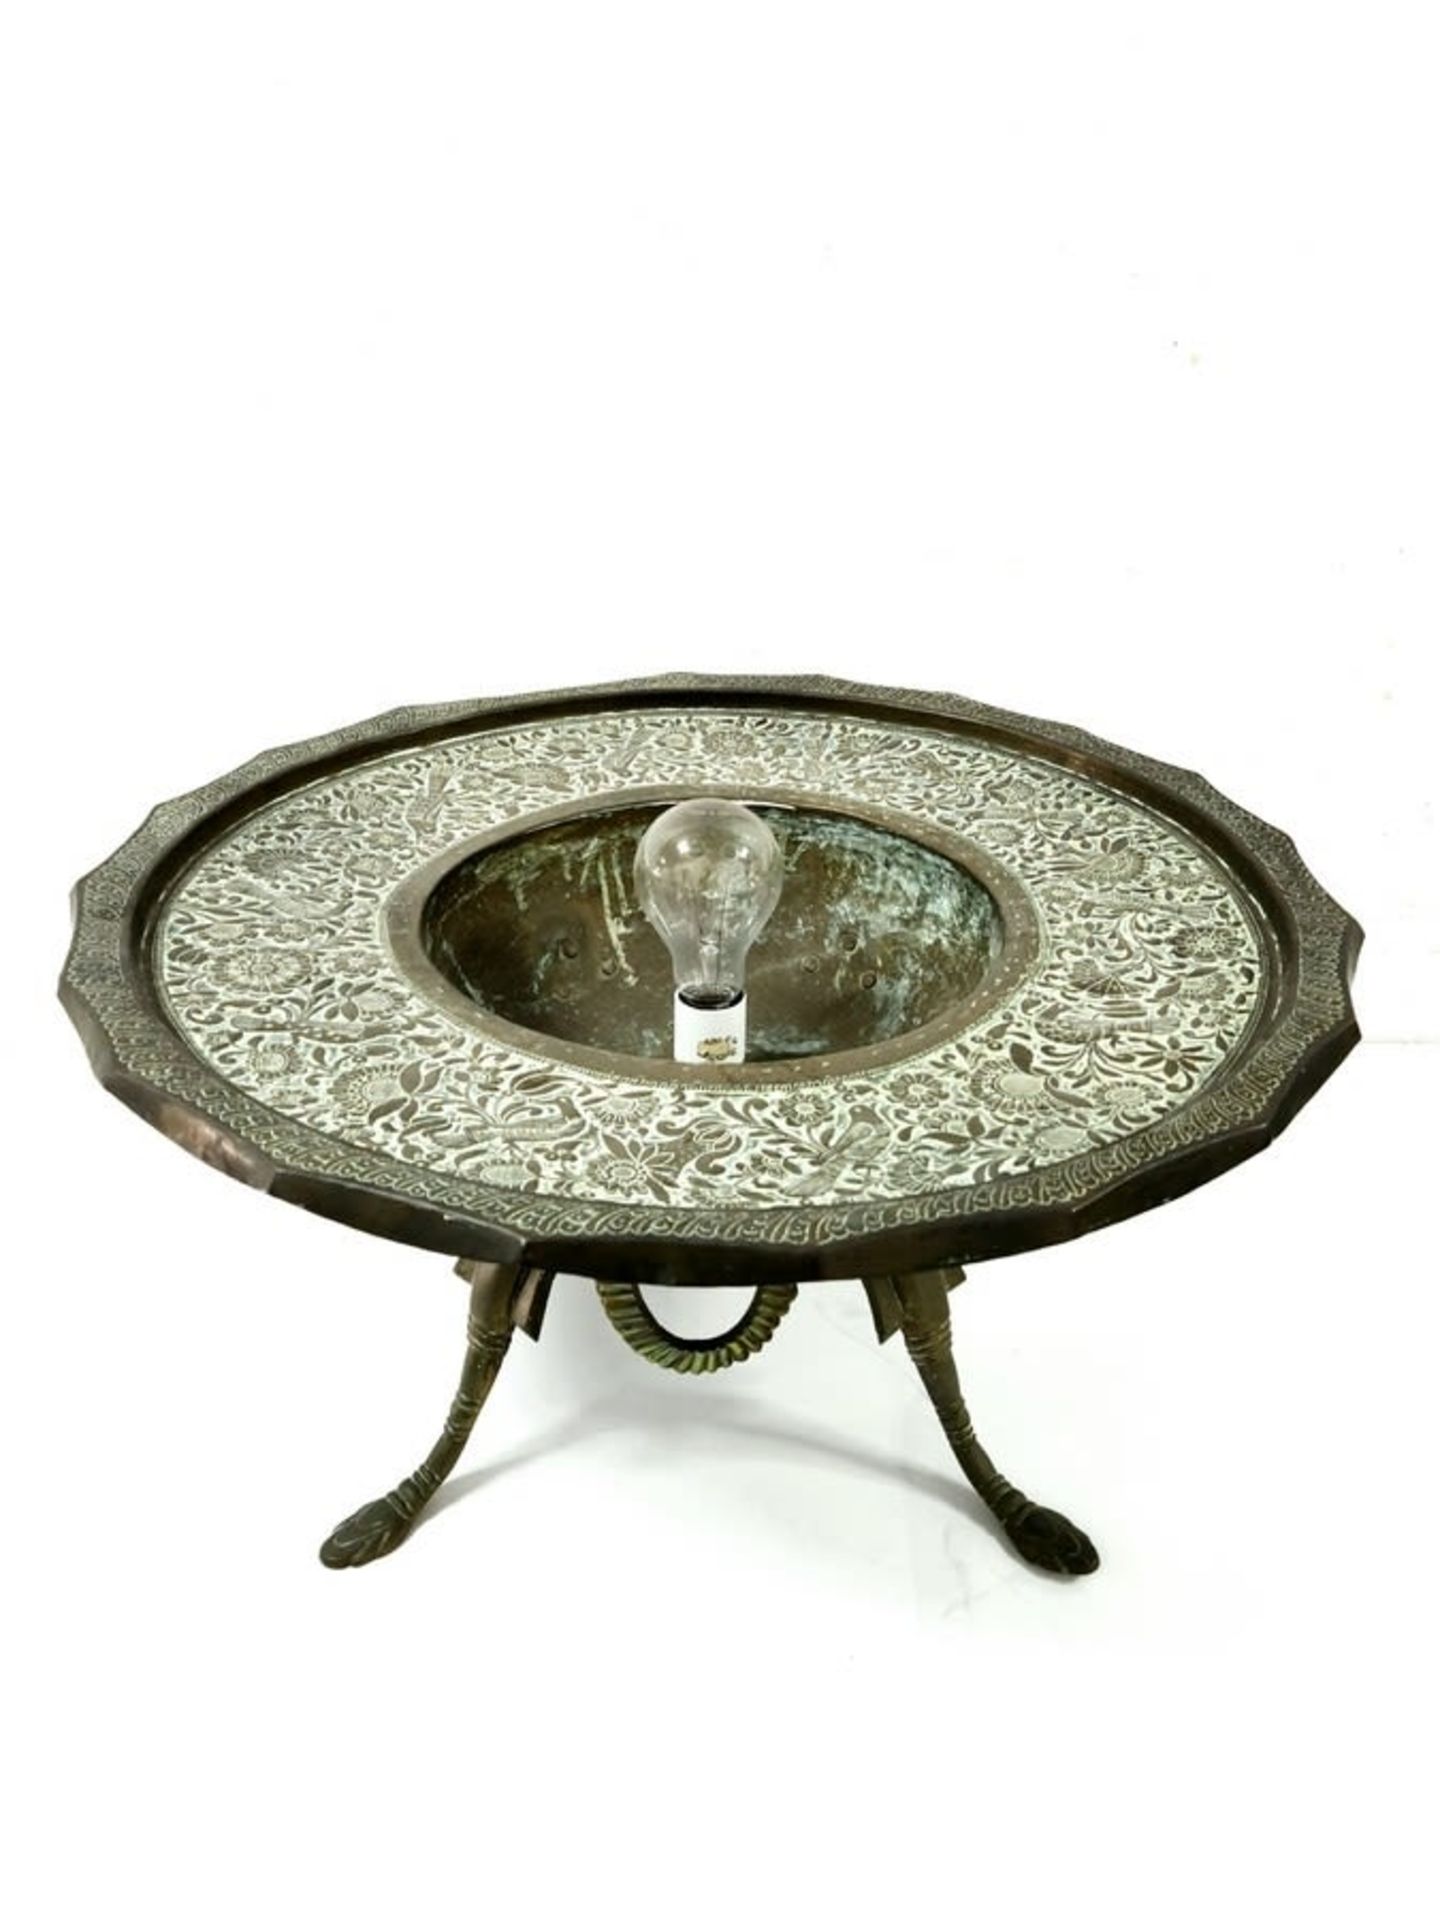 Impressive and high-quality antique Ottoman Turkish brazier, made of hammered and engraved sawn - Bild 4 aus 8